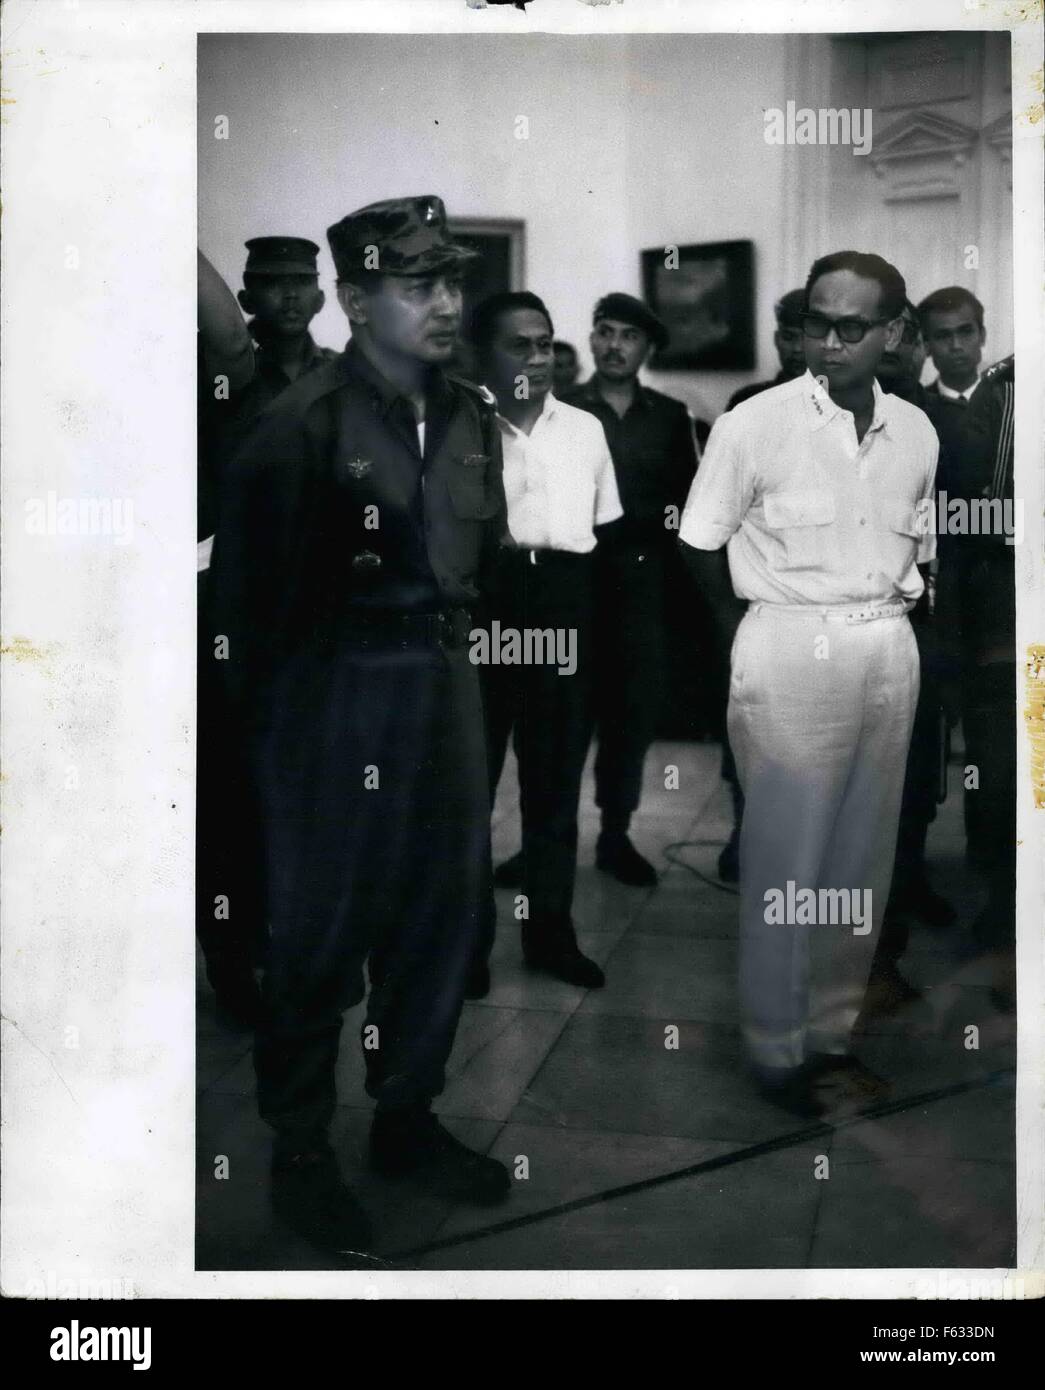 1965 - Maj. Gen Suharto (left in army uniform) at Istana Palace, Djakarta Indonesia, Oct. 14, 1965 when President Sukarno appointed him Army Chief of Staff. Suharto replaces Lt. gen Achmad yani, who was killed by the communists during the Oct. 1 aborted coup. In white, at right, is Dr. Subandario, 1st Deputy, Minister. An historic picture showing the two antagonists together (may be for the last time) with Suhato showing calm and resolution, while Subandario shows distrust and insecurity. © Keystone Pictures USA/ZUMAPRESS.com/Alamy Live News Stock Photo